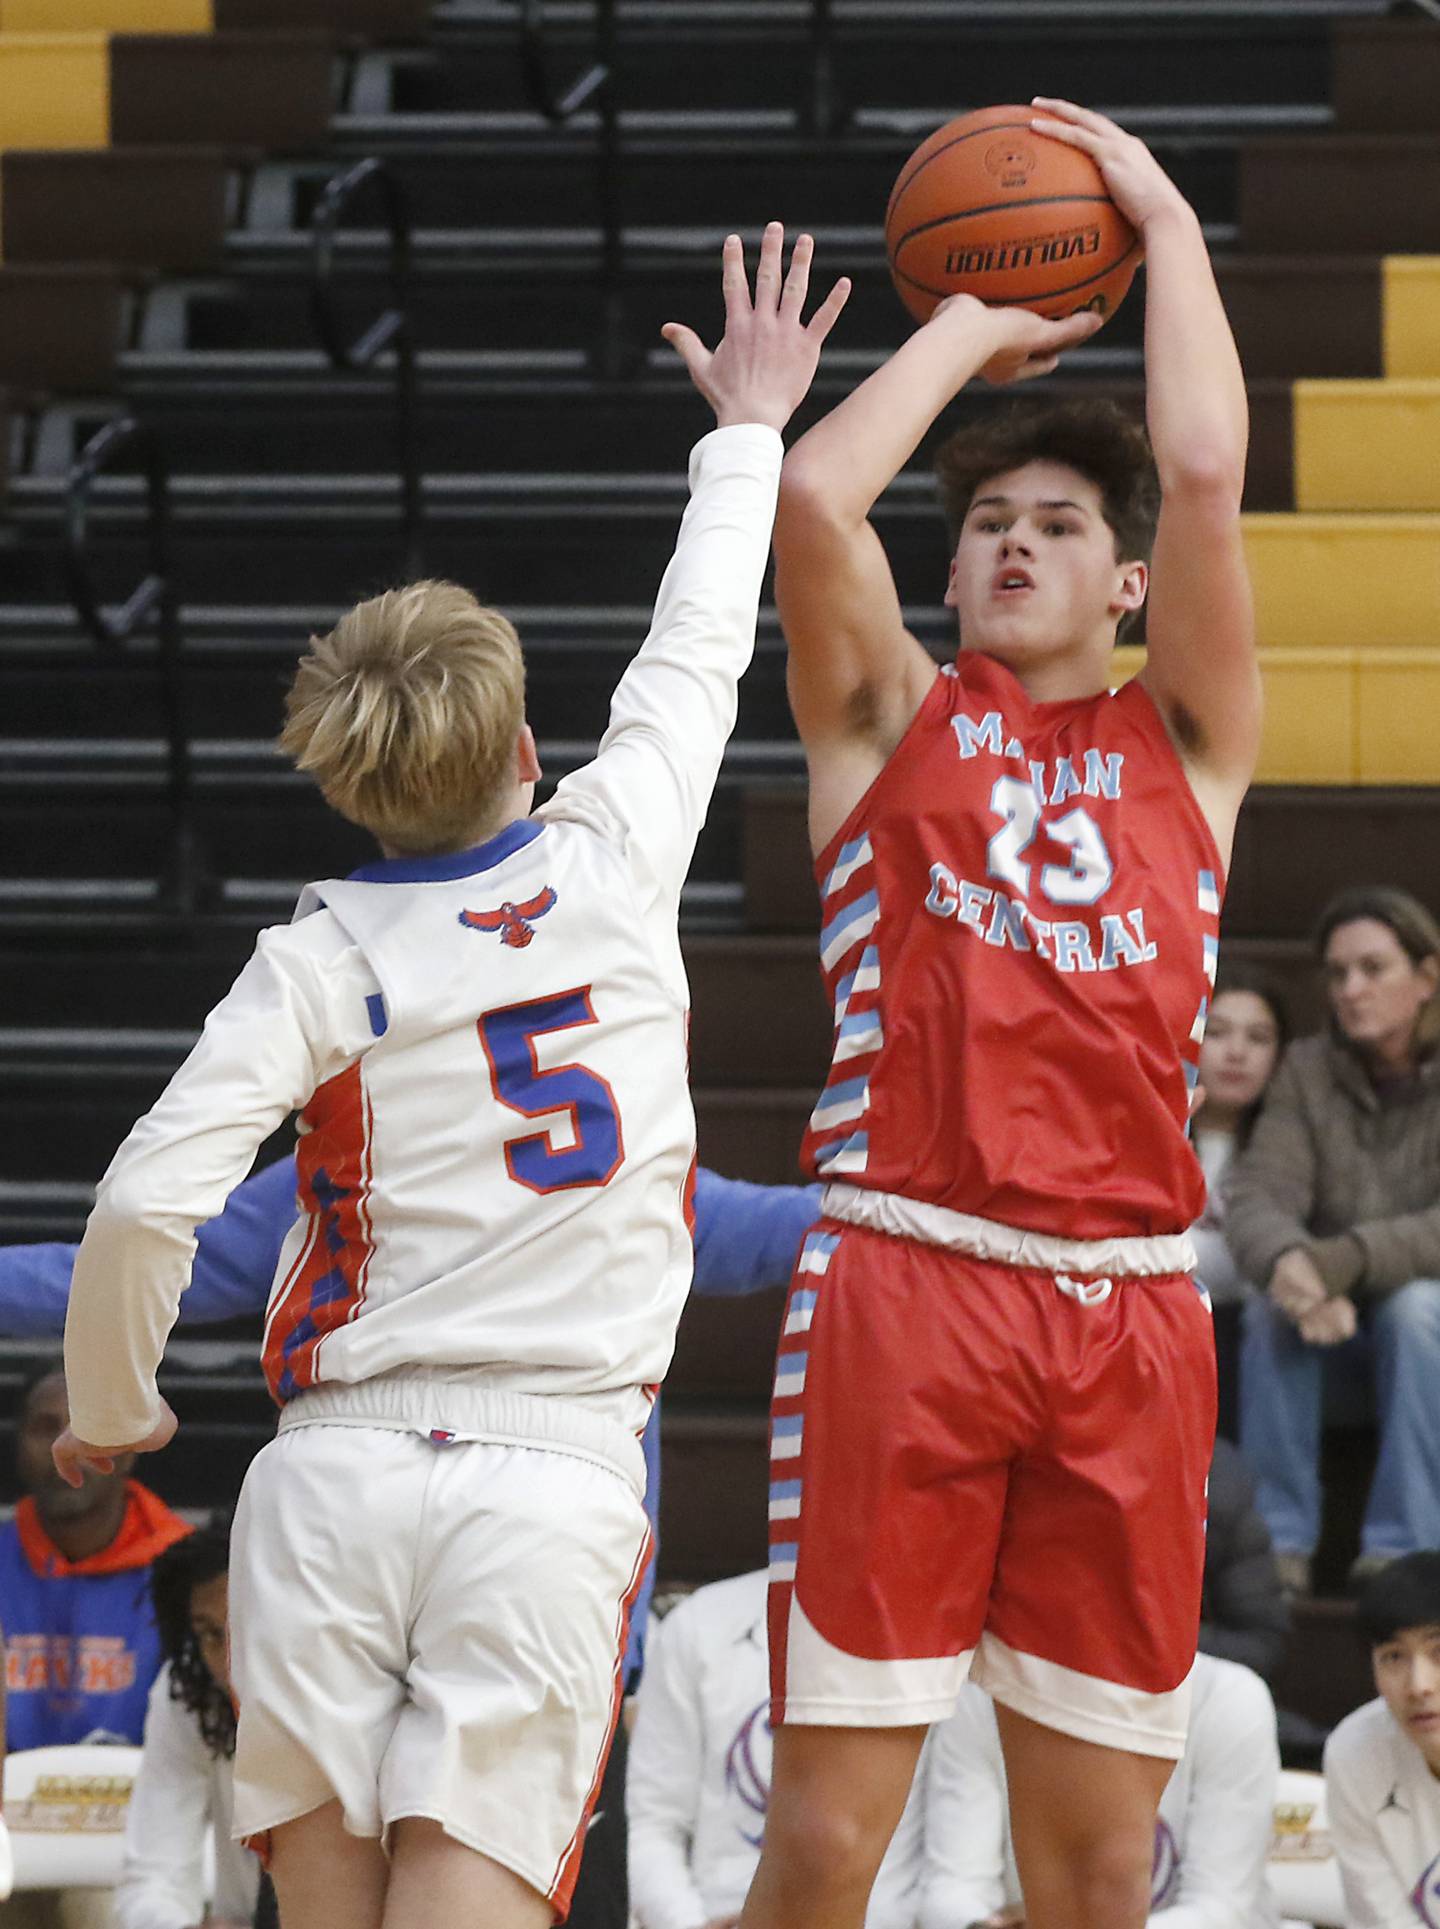 Marian Central's Cale McThenia shoots the ball over Hoffman Estates’ Connor Kurzynski during a Hinkle Holiday Classic basketball game Tuesday, Dec. 27, 2022, at Jacobs High School in Algonquin.